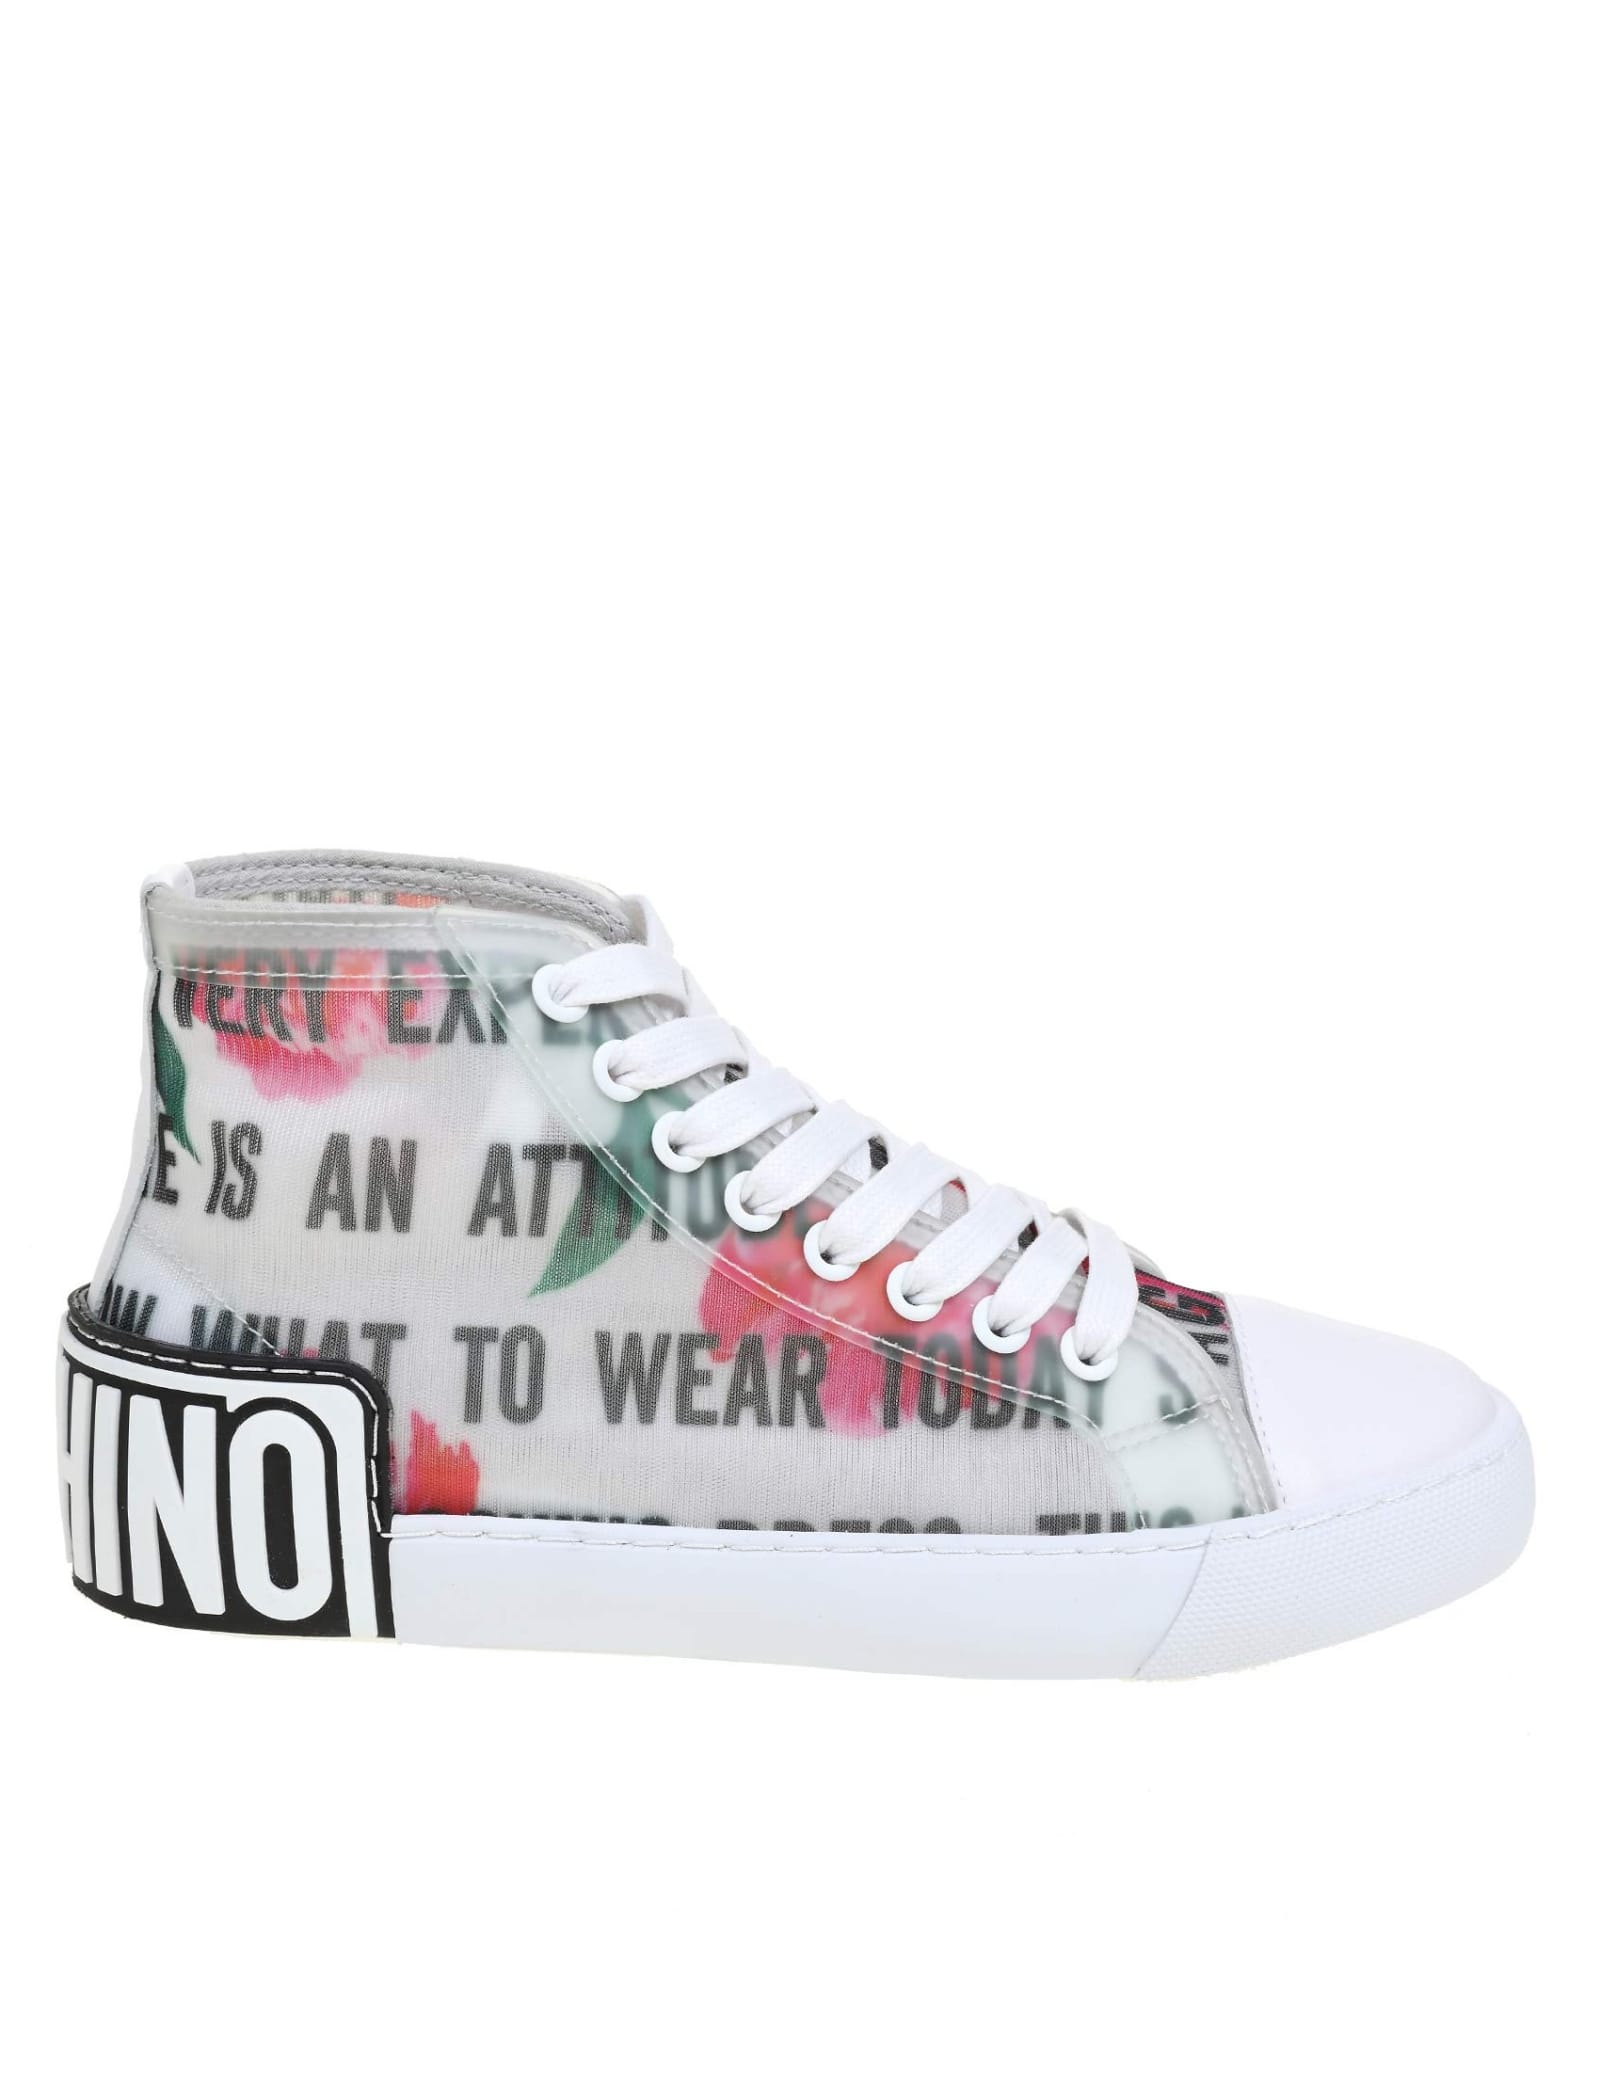 Buy Moschino Sneakers Slogan & Flowers online, shop Moschino shoes with free shipping